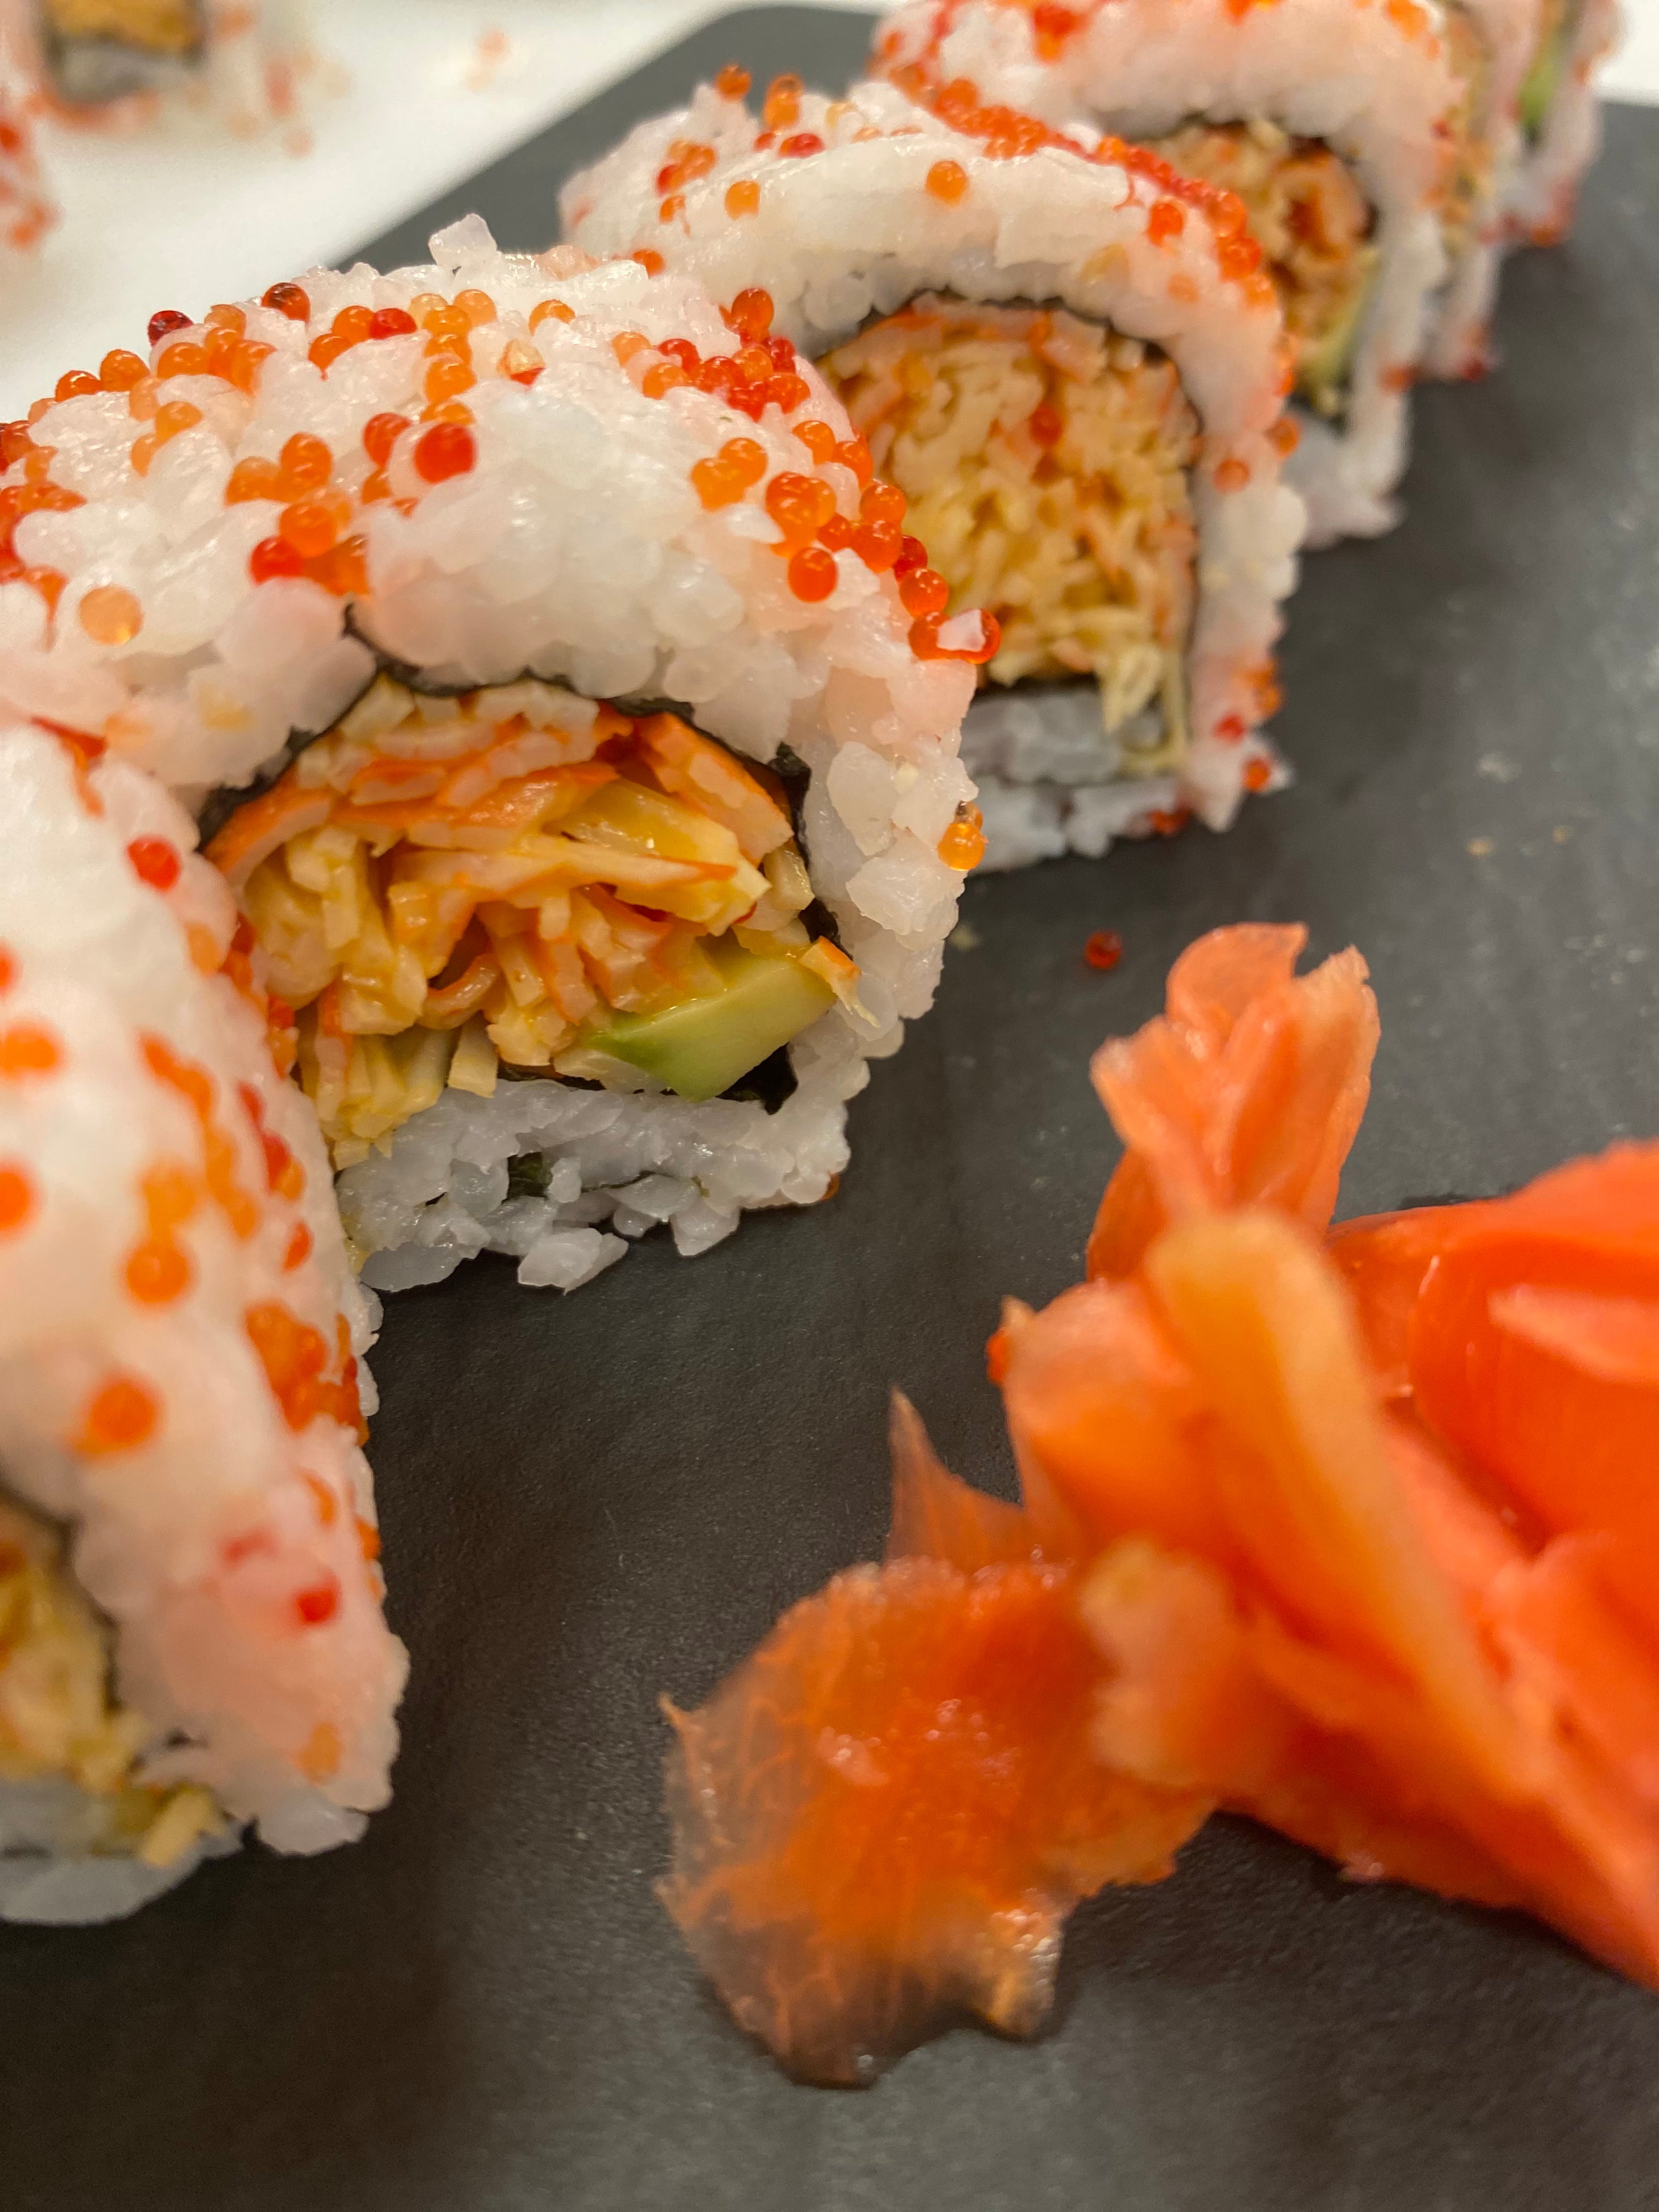 THE SPICY CRAB ROLL